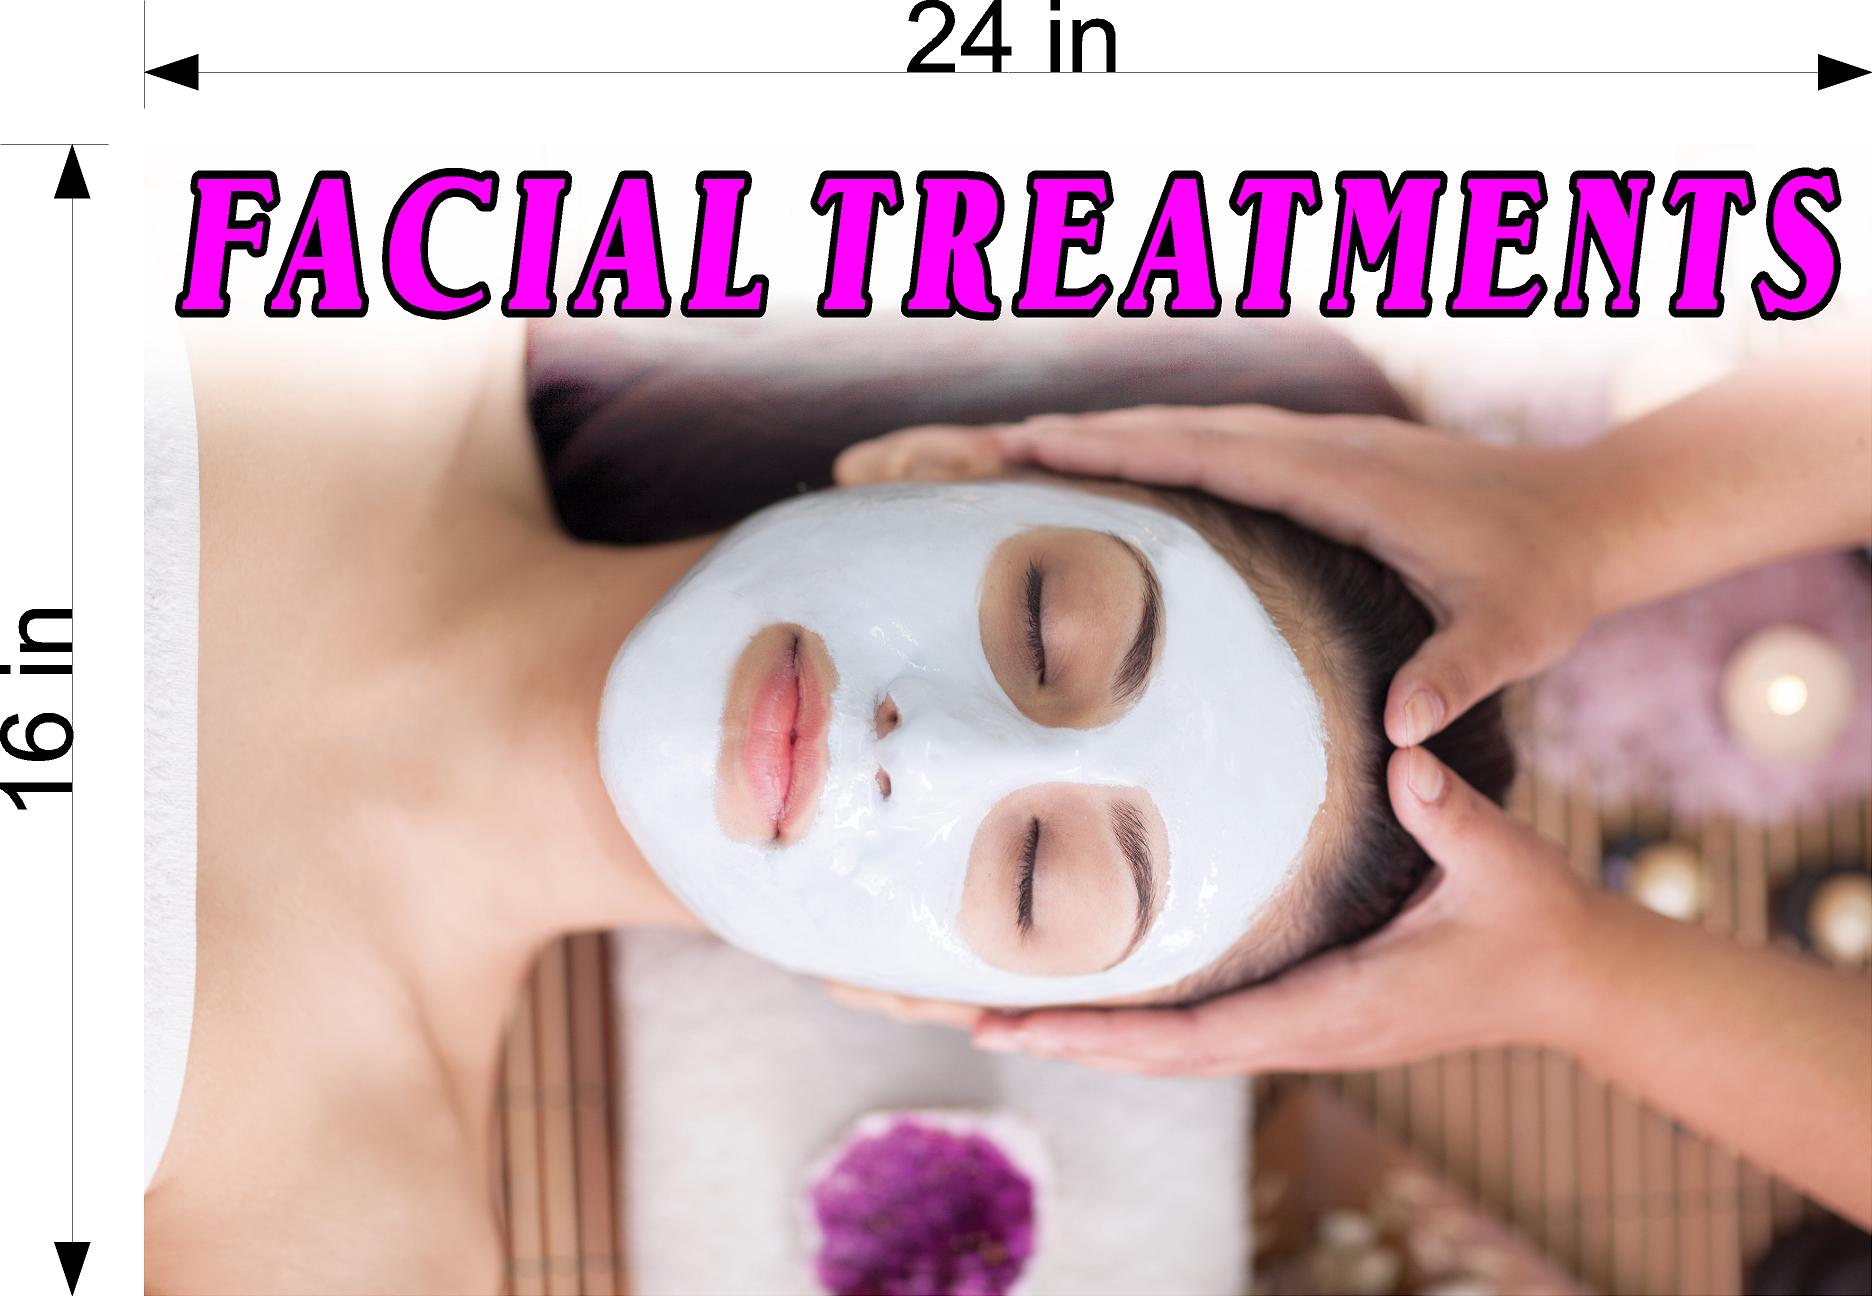 Facial 07 Wallpaper Poster Decal with Adhesive Backing Wall Sticker Decor Day Spa Horizontal